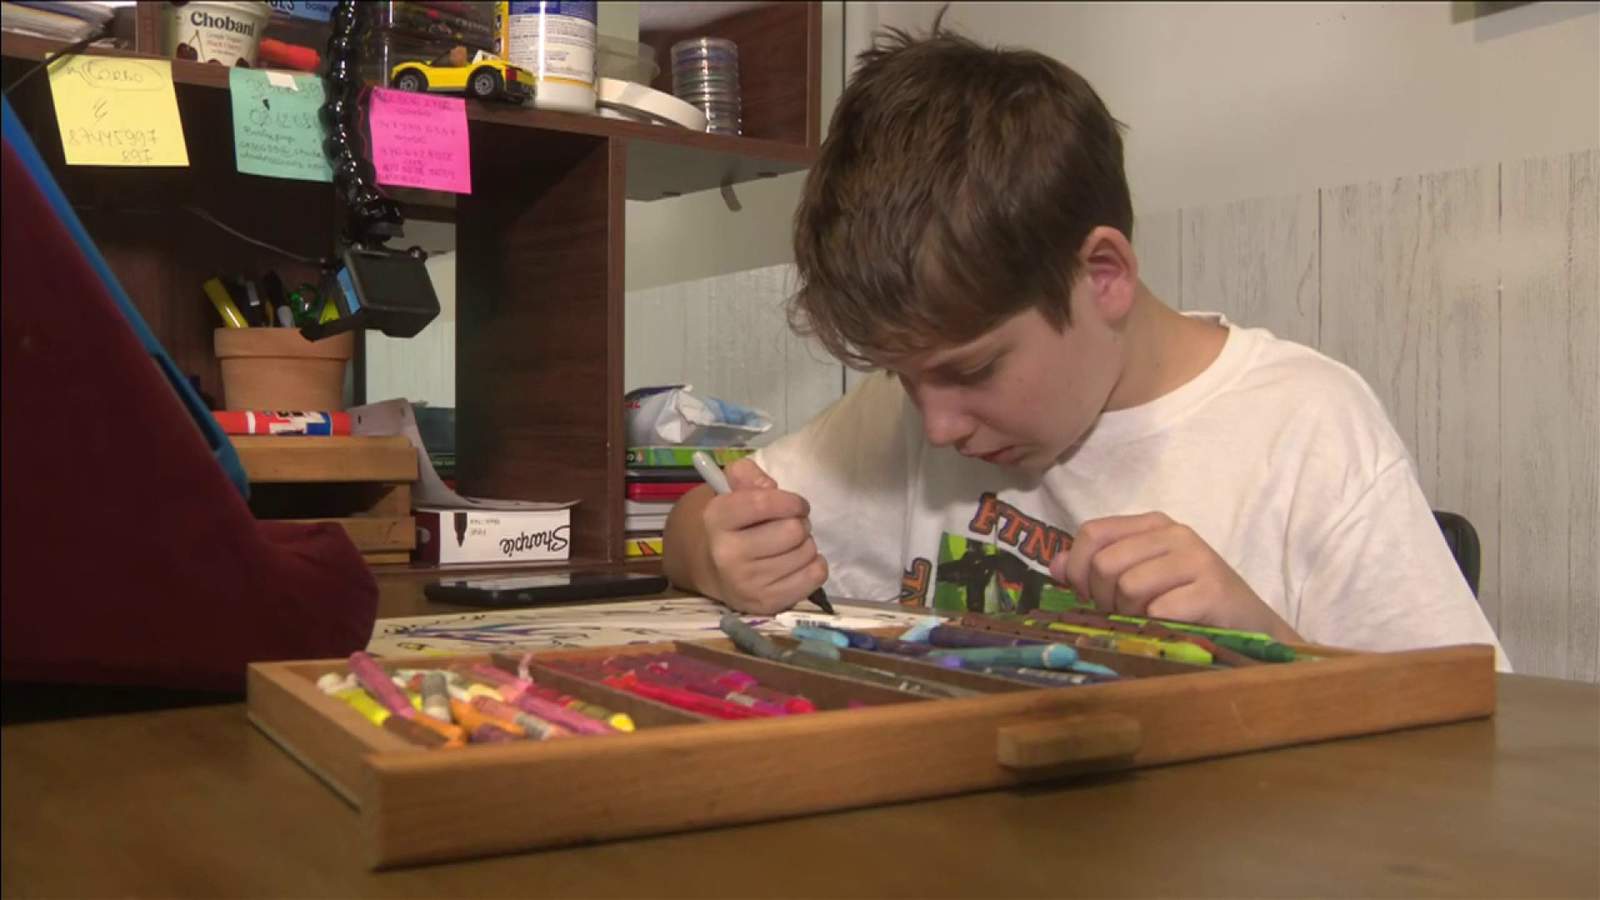 Viktor, 12, artist with nonverbal autism, skillfully delivers to growing audience